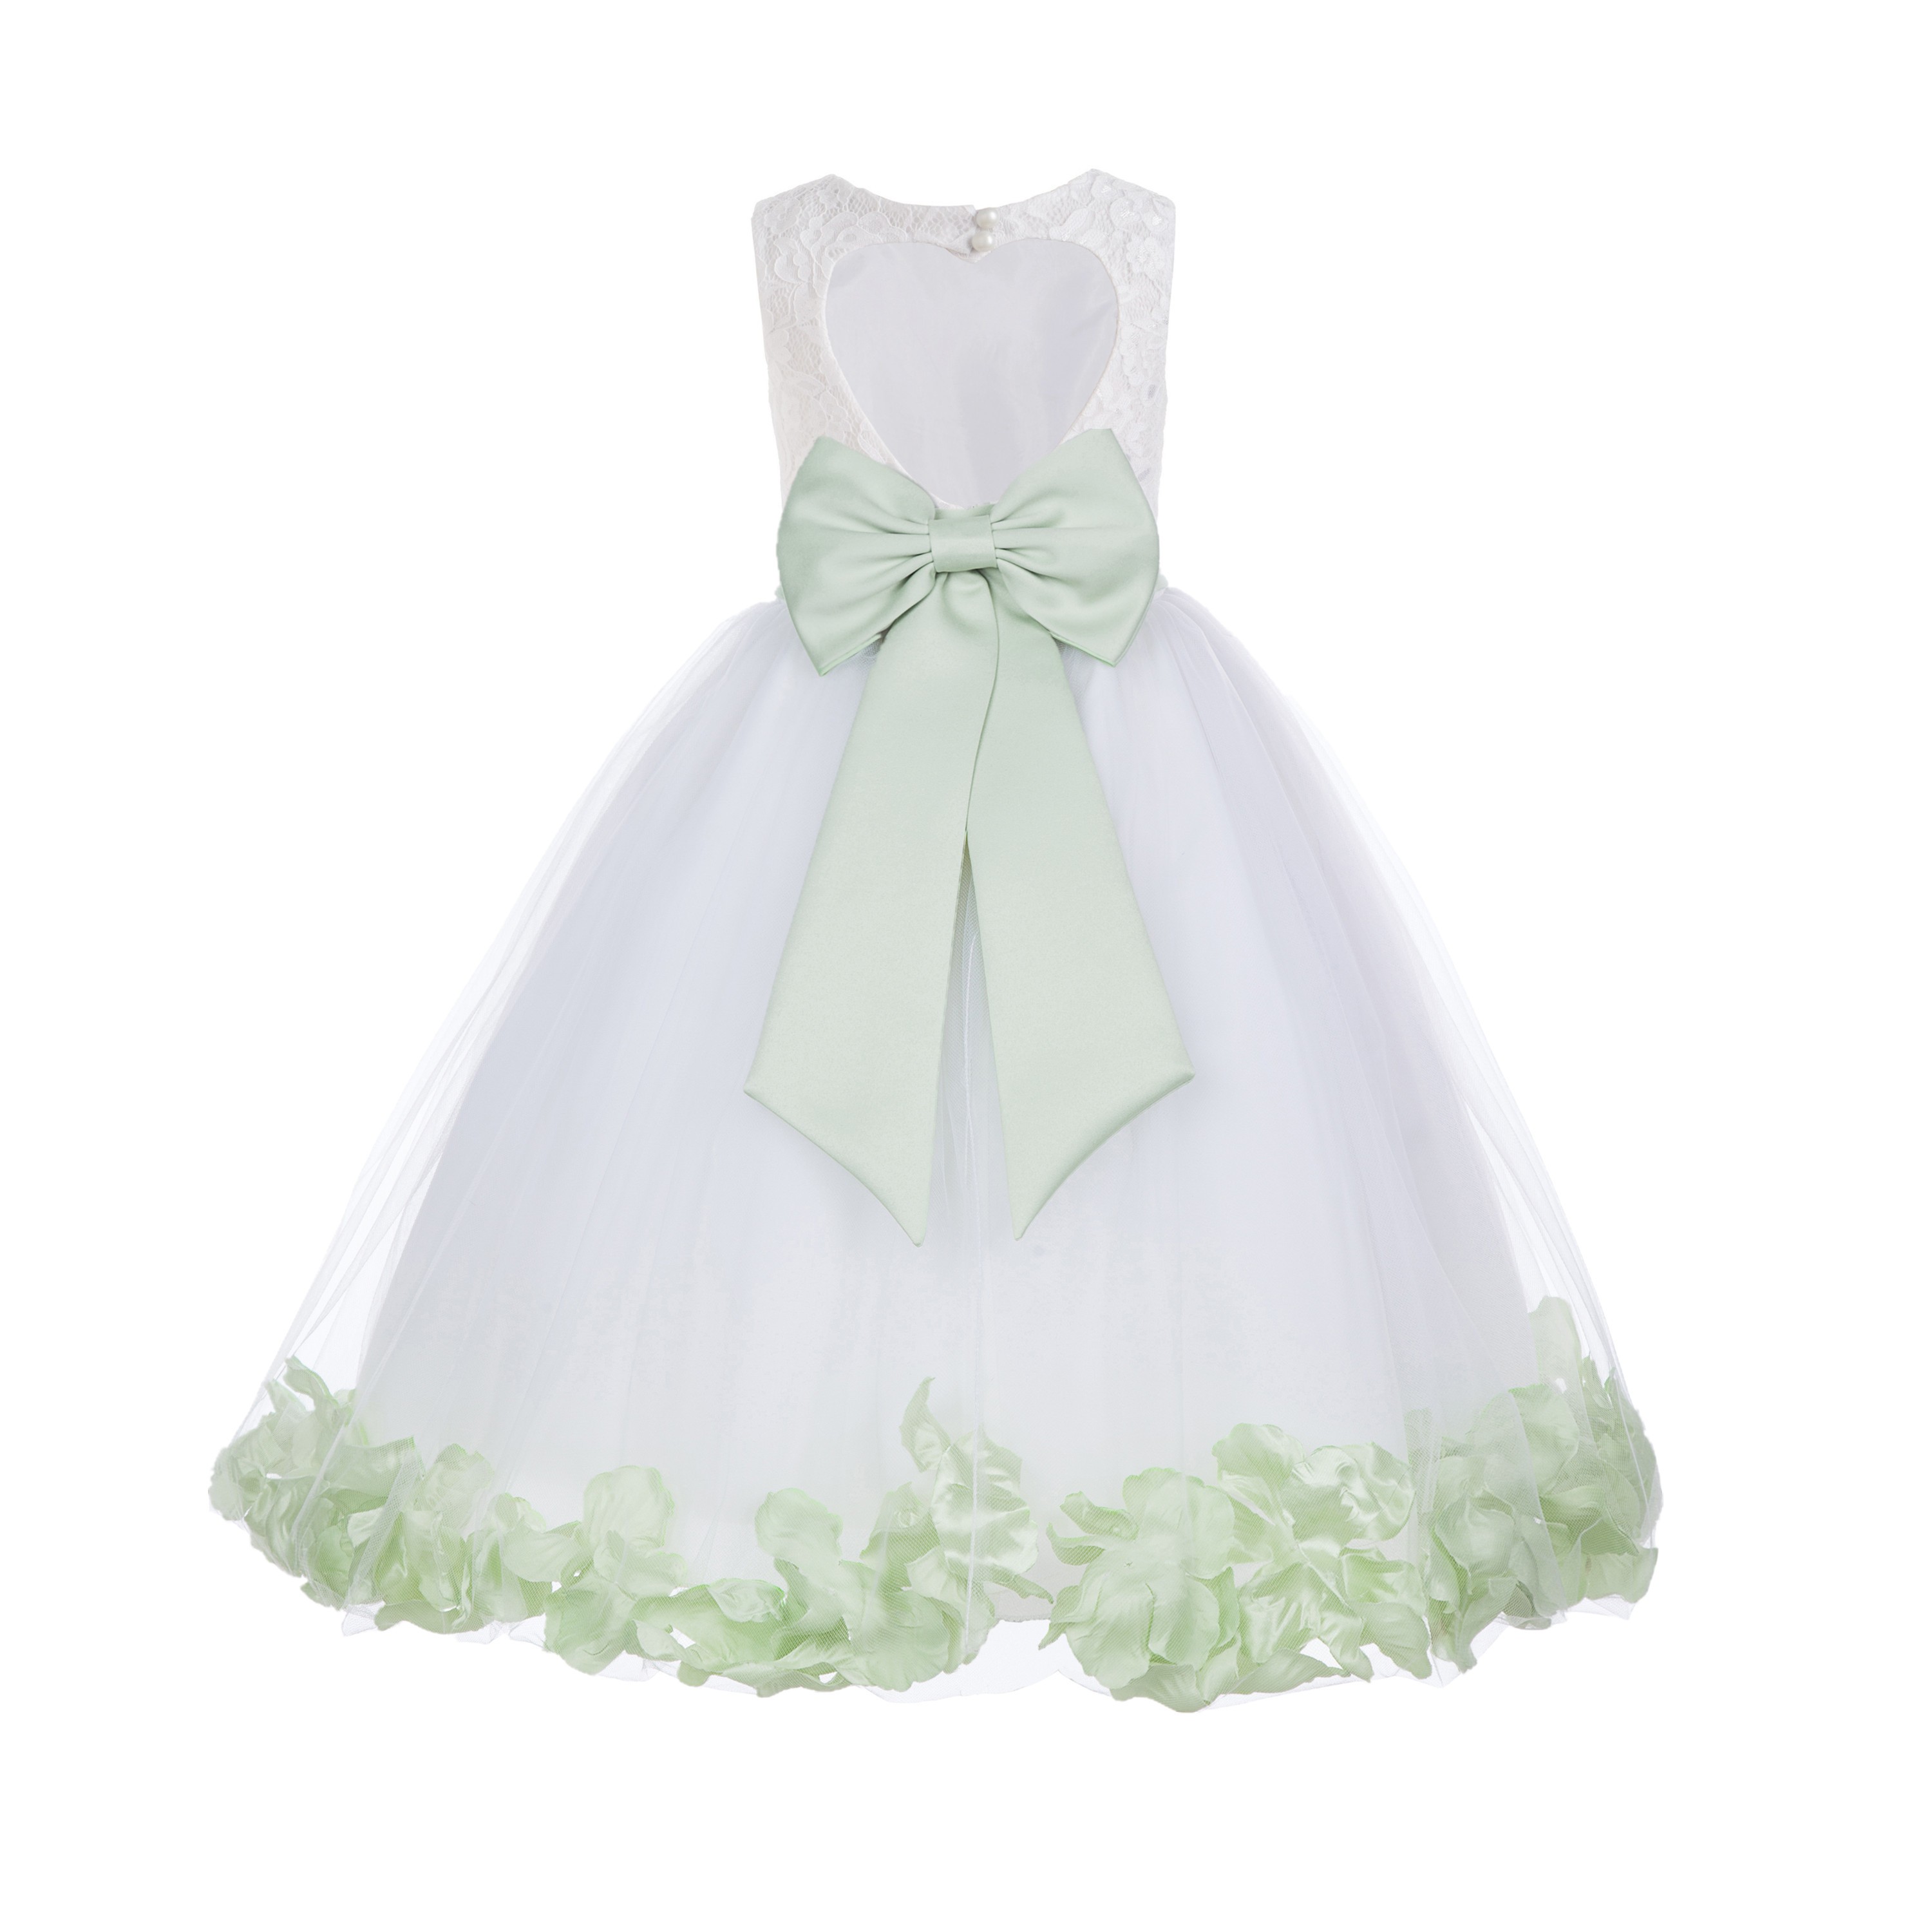 White / Sage Floral Lace Heart Cutout Flower Girl Dress with Petals 185T